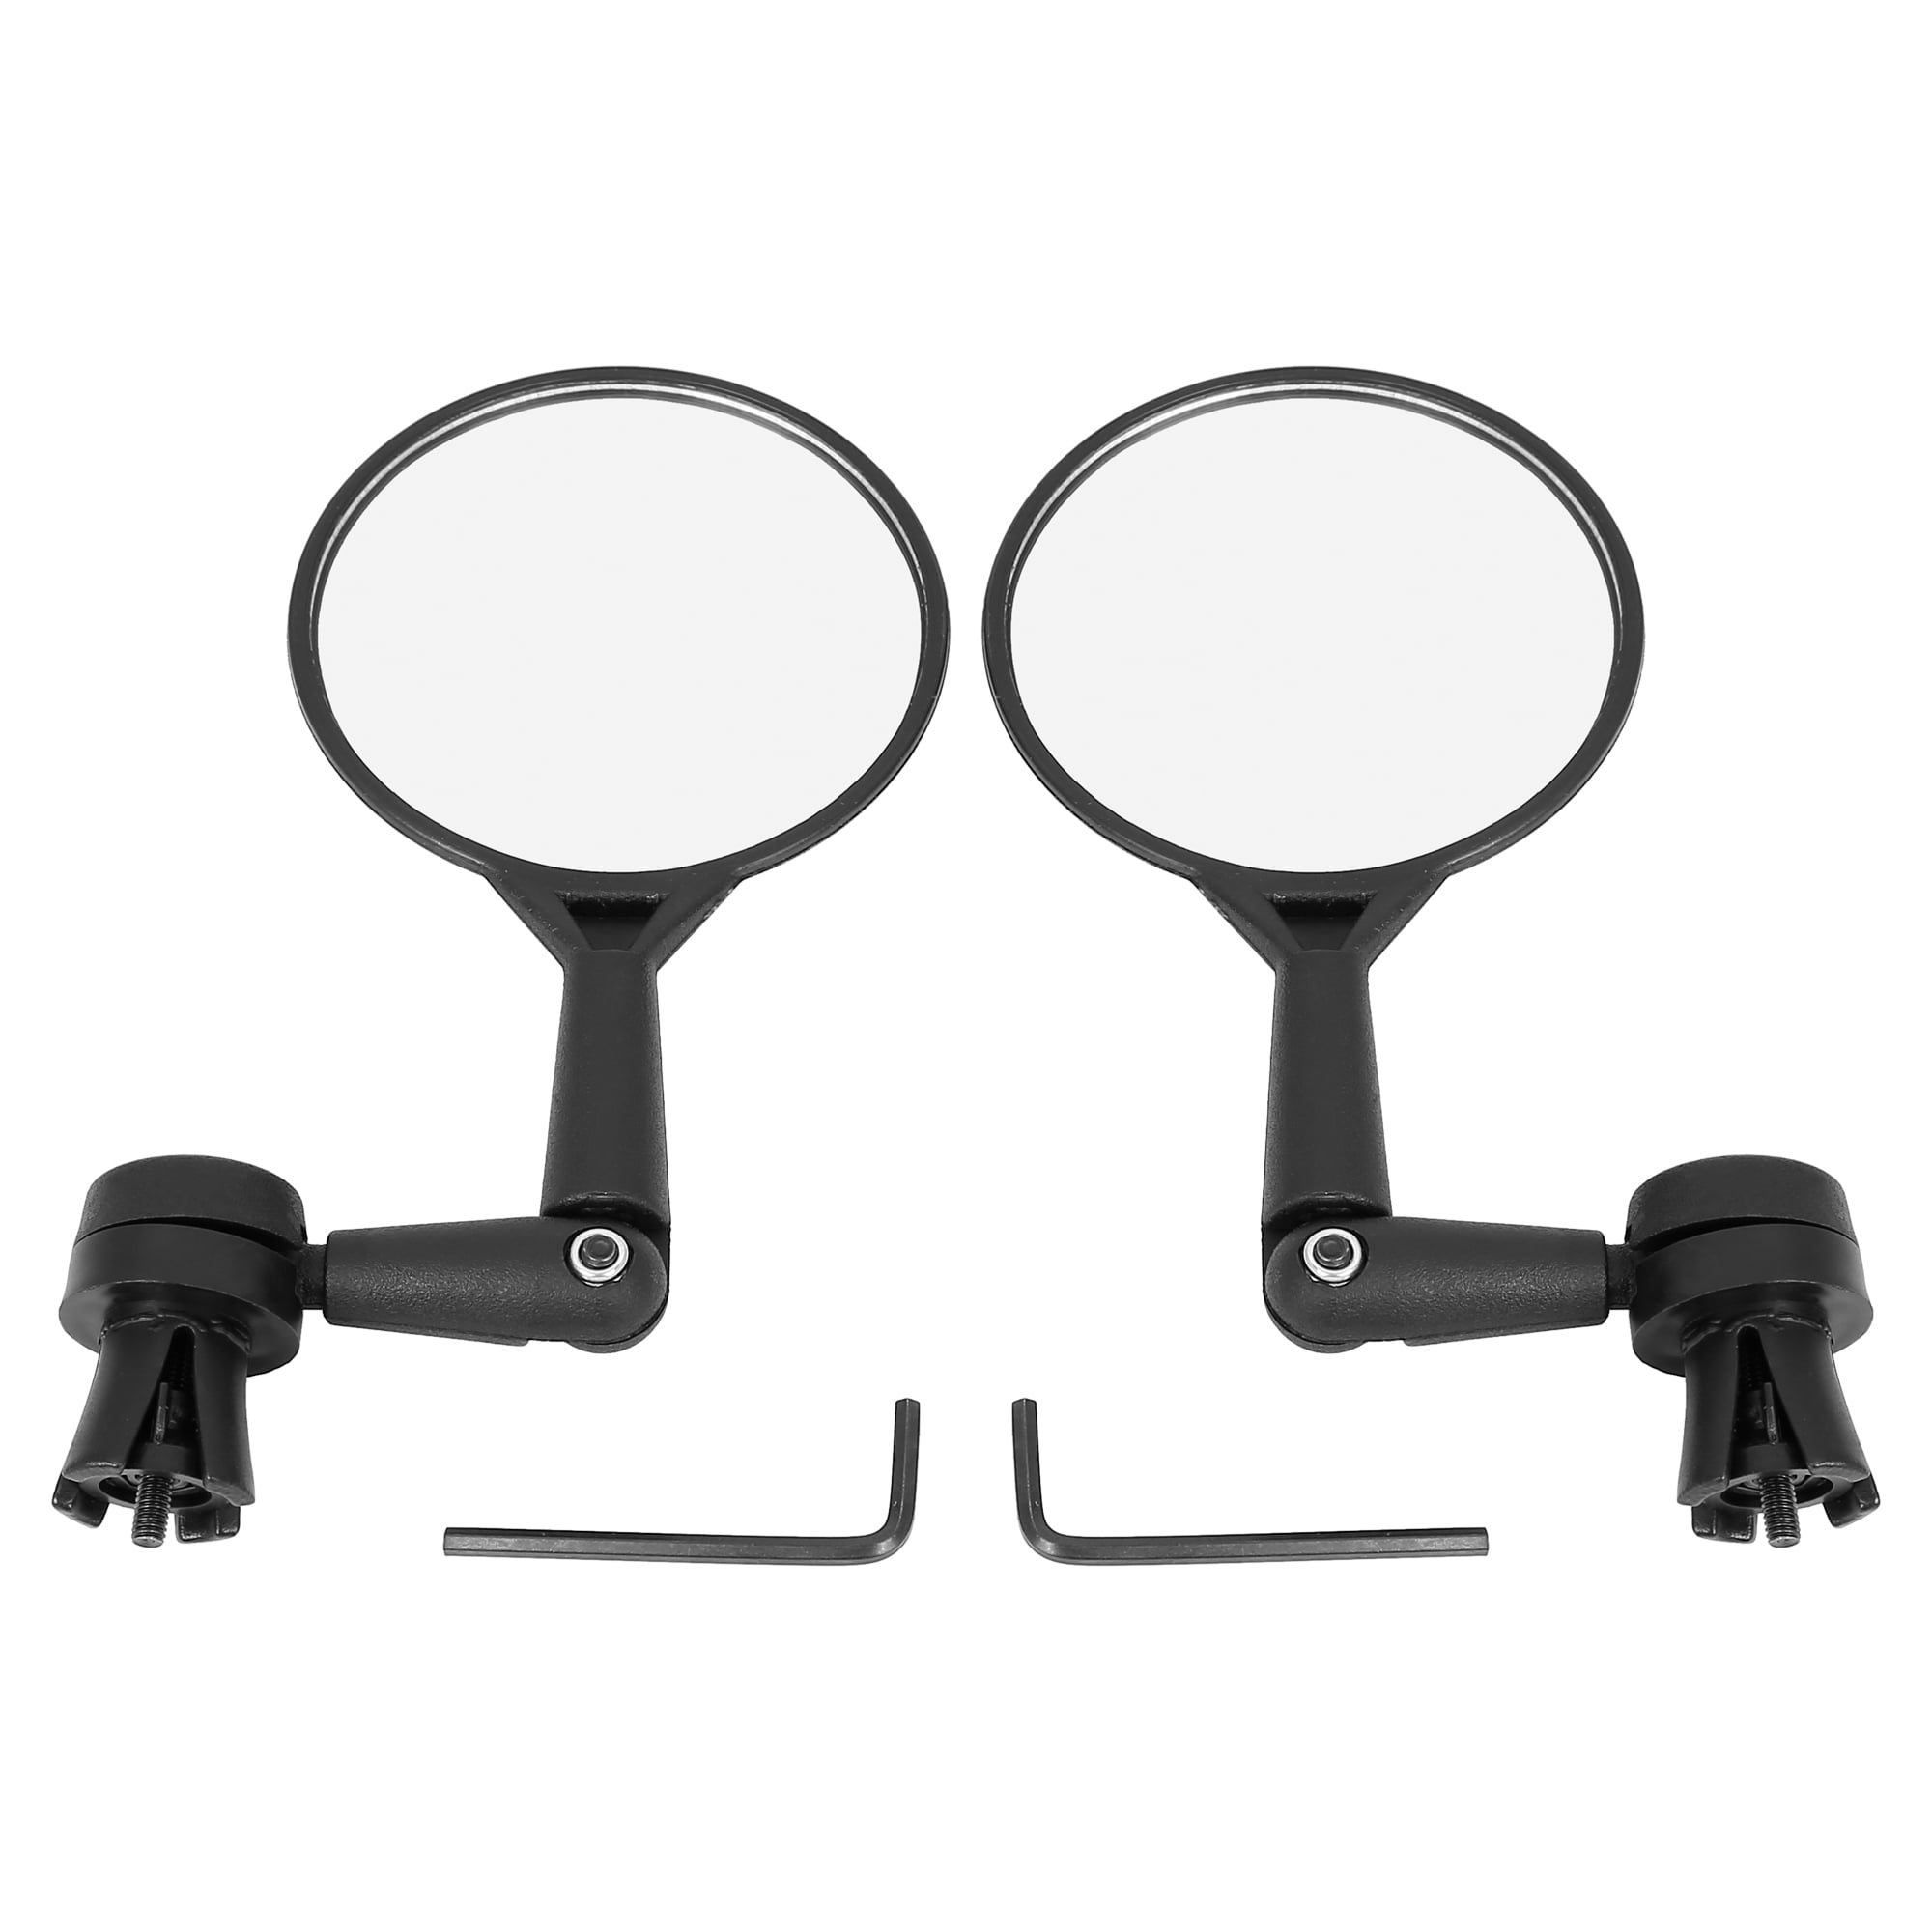 2x Wide Rear View Rearview Convex Mirror Cycling Bike Bicycle Handlebar Safe uk 